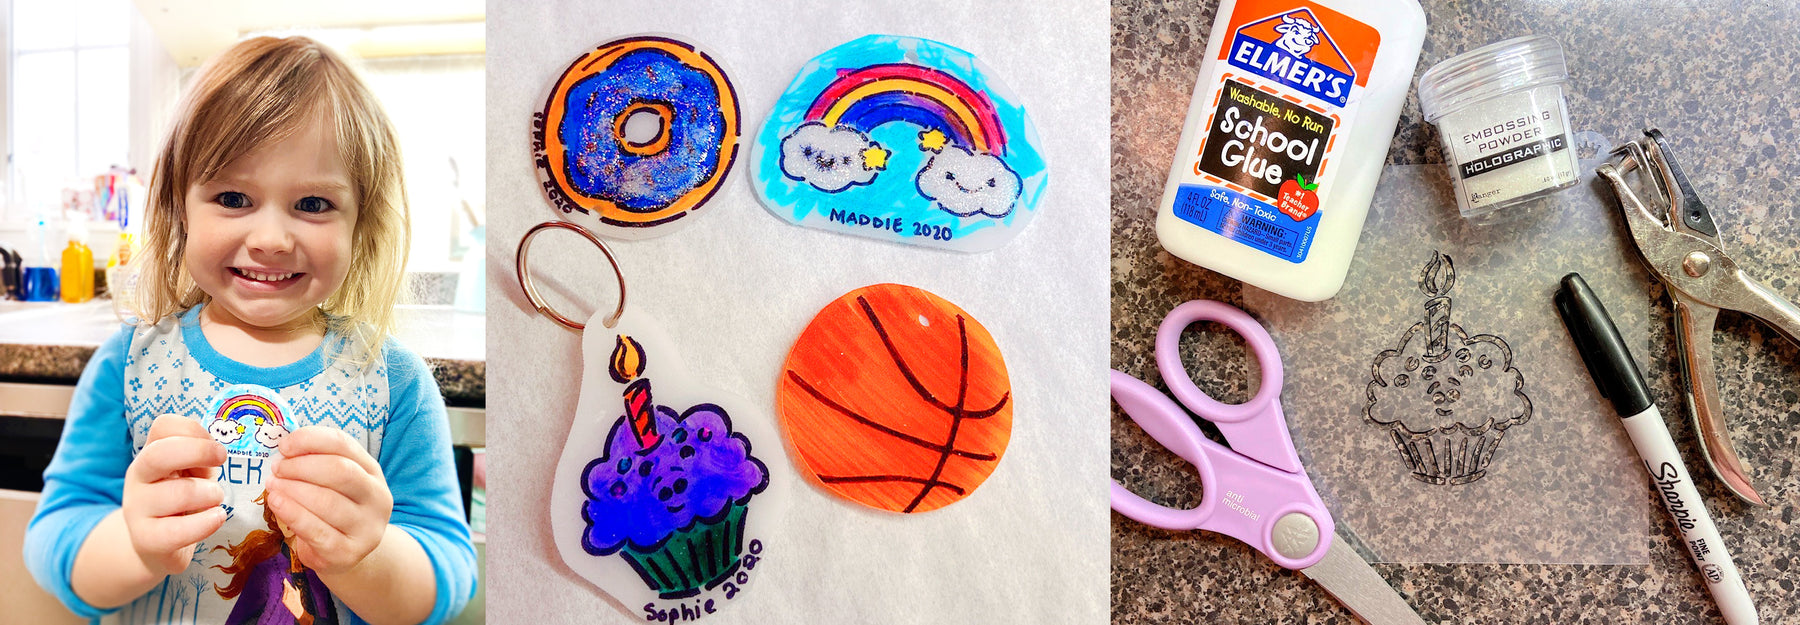 Sanity with Sarah: Use Stencils to Make Shrinky Dink Keychains